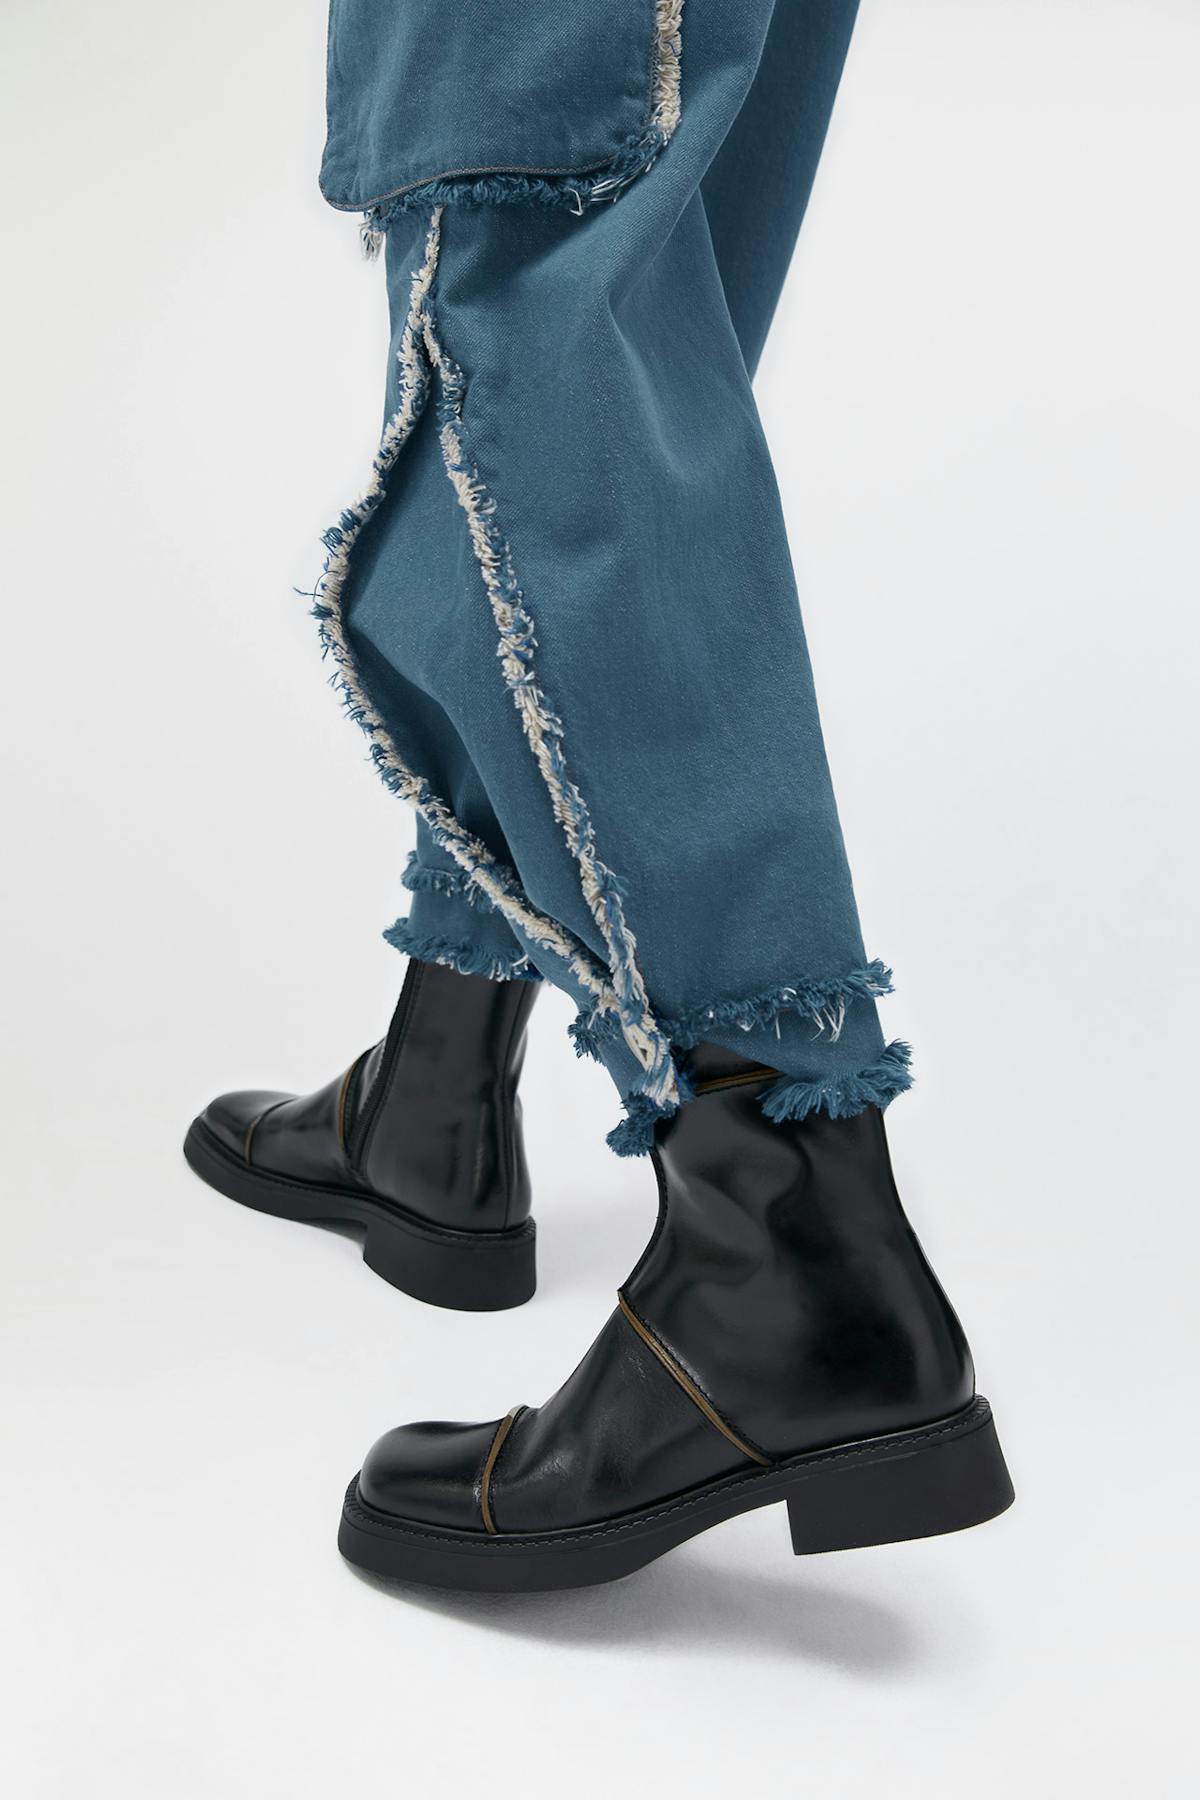 Dahlia Black Boots // E8 by Miista // Made in Portugal